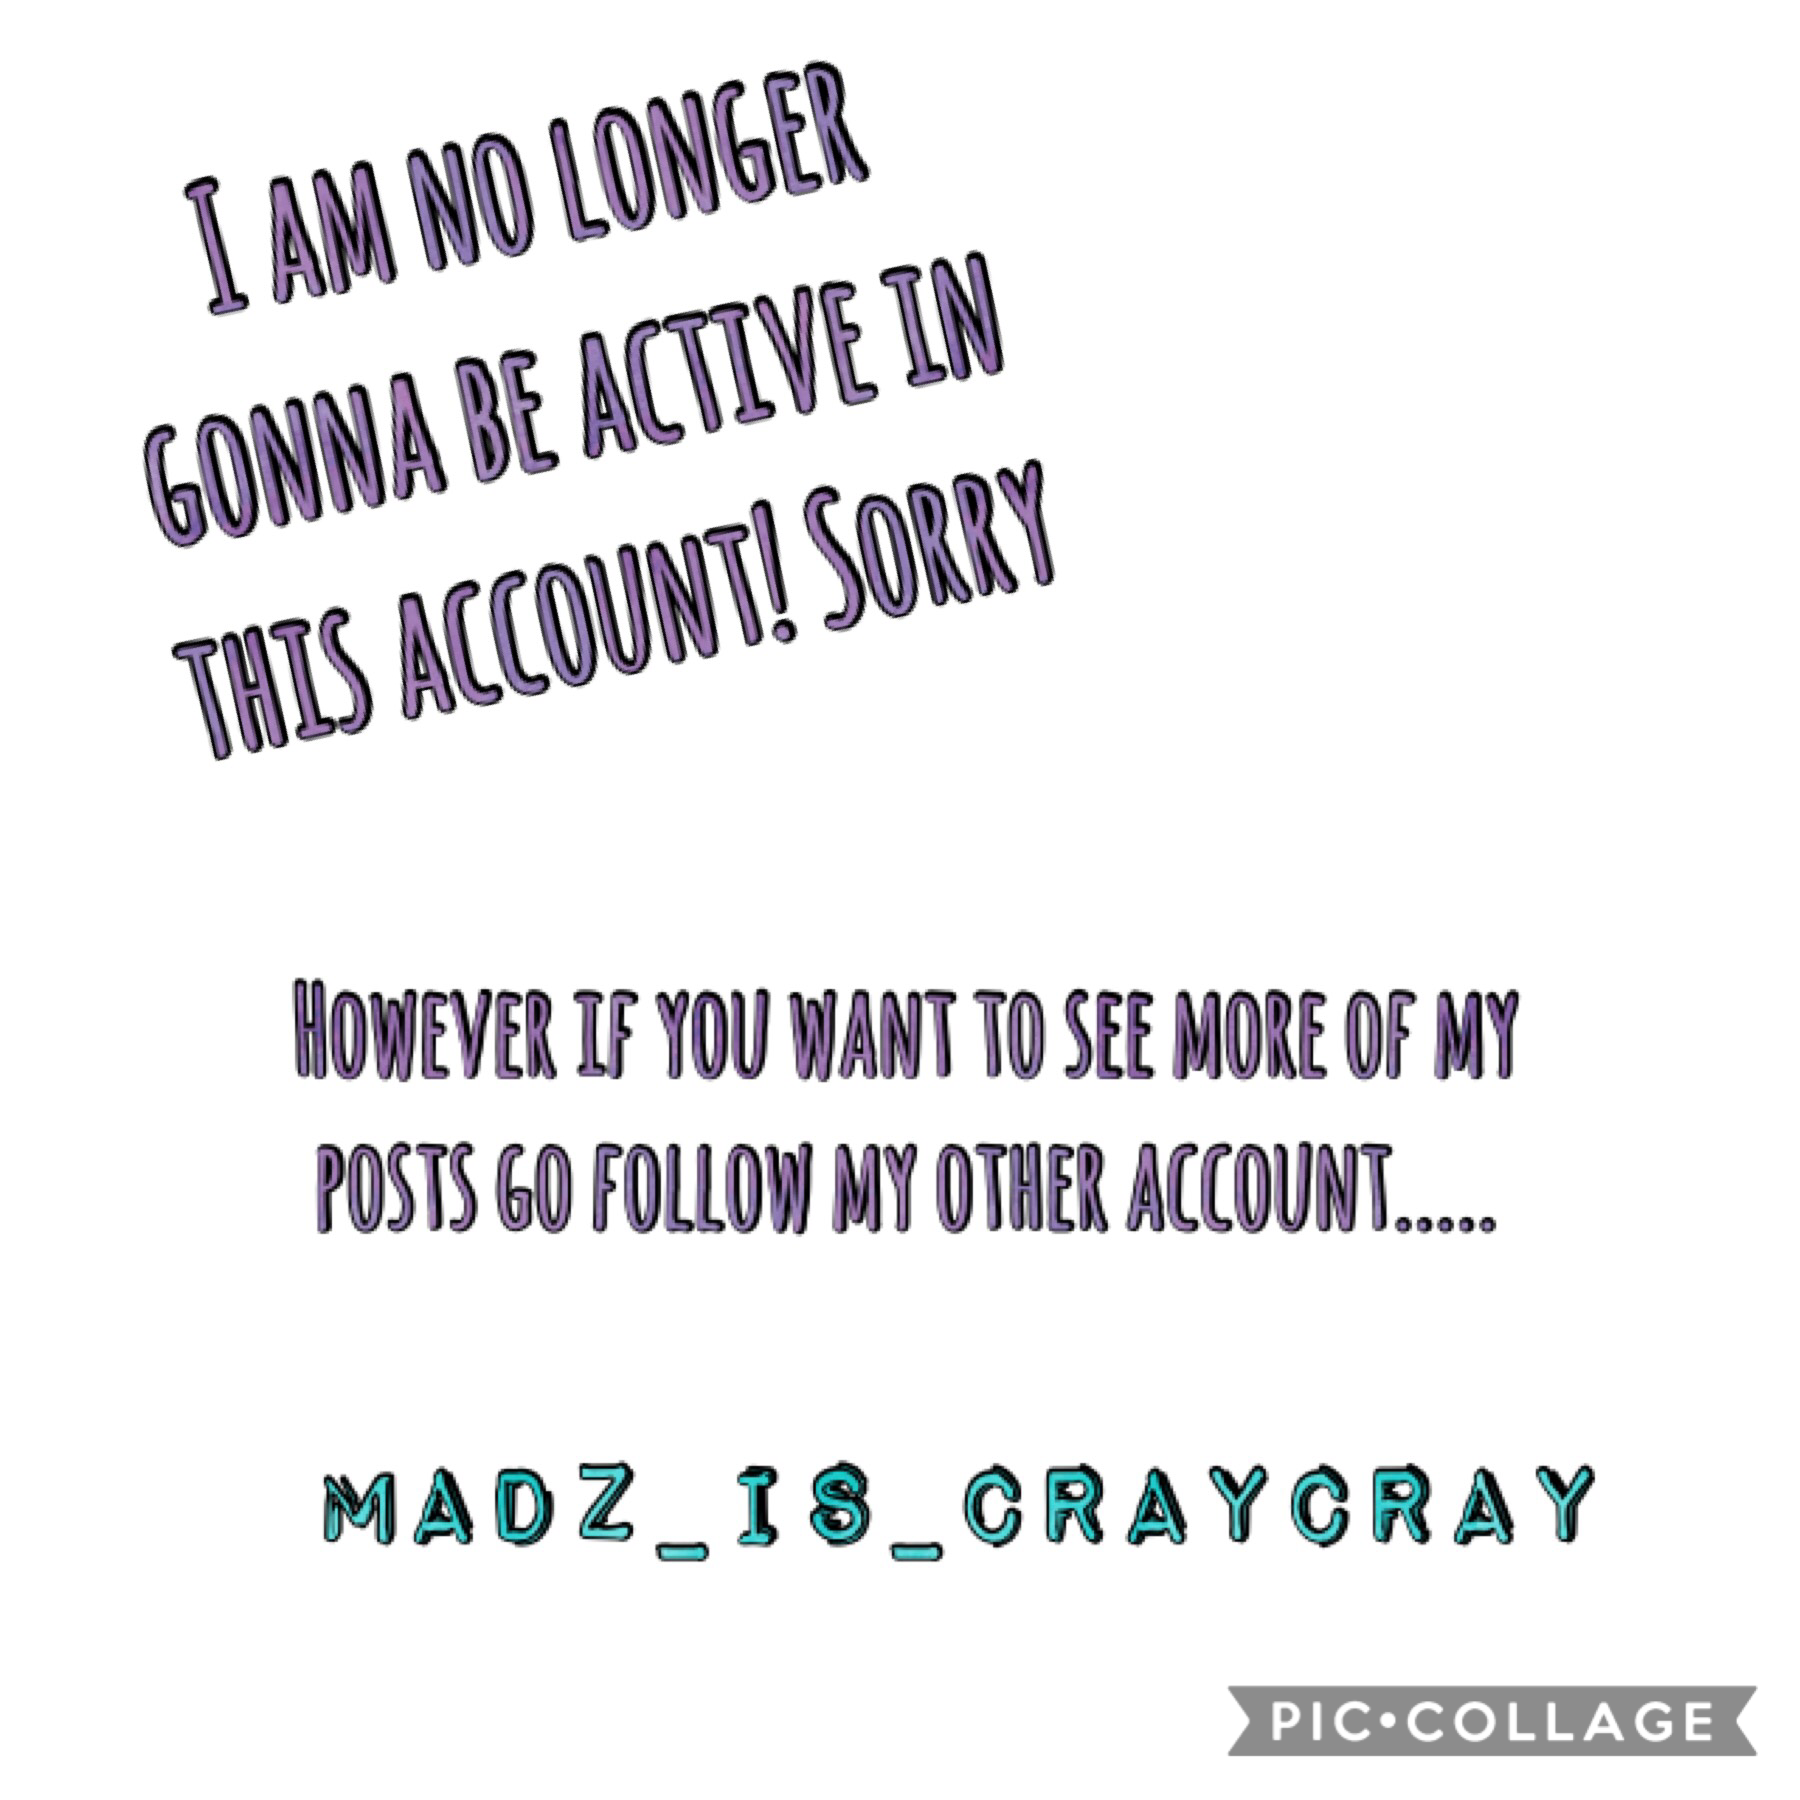 Sorry guys! 😐 but plz #madzfam go follow my other account that I will because on!